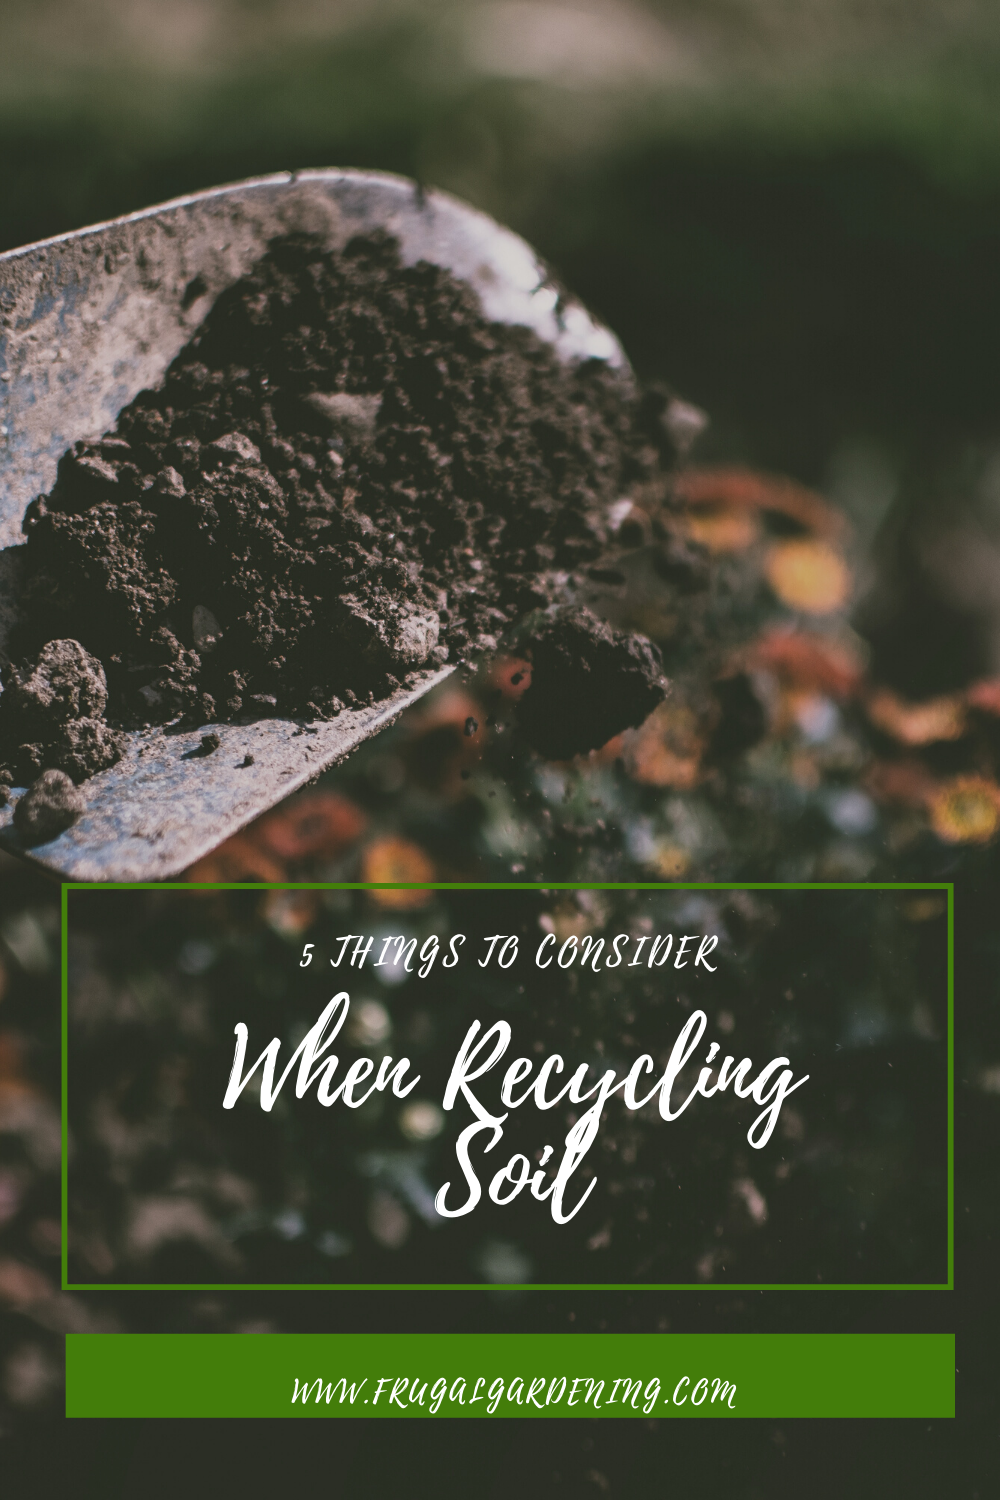 5 Things To Consider When Recycling Soil